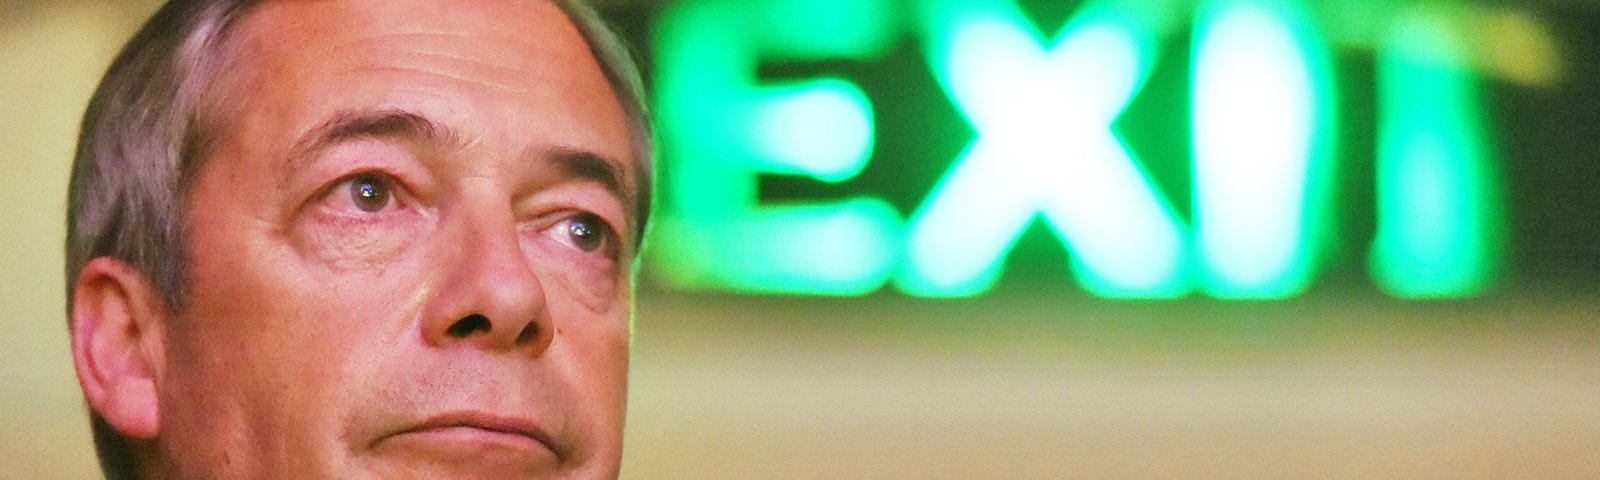 Just Nigel Farage’s head on the left of the picture with a big green neon light saying exit on the rest of the picture.